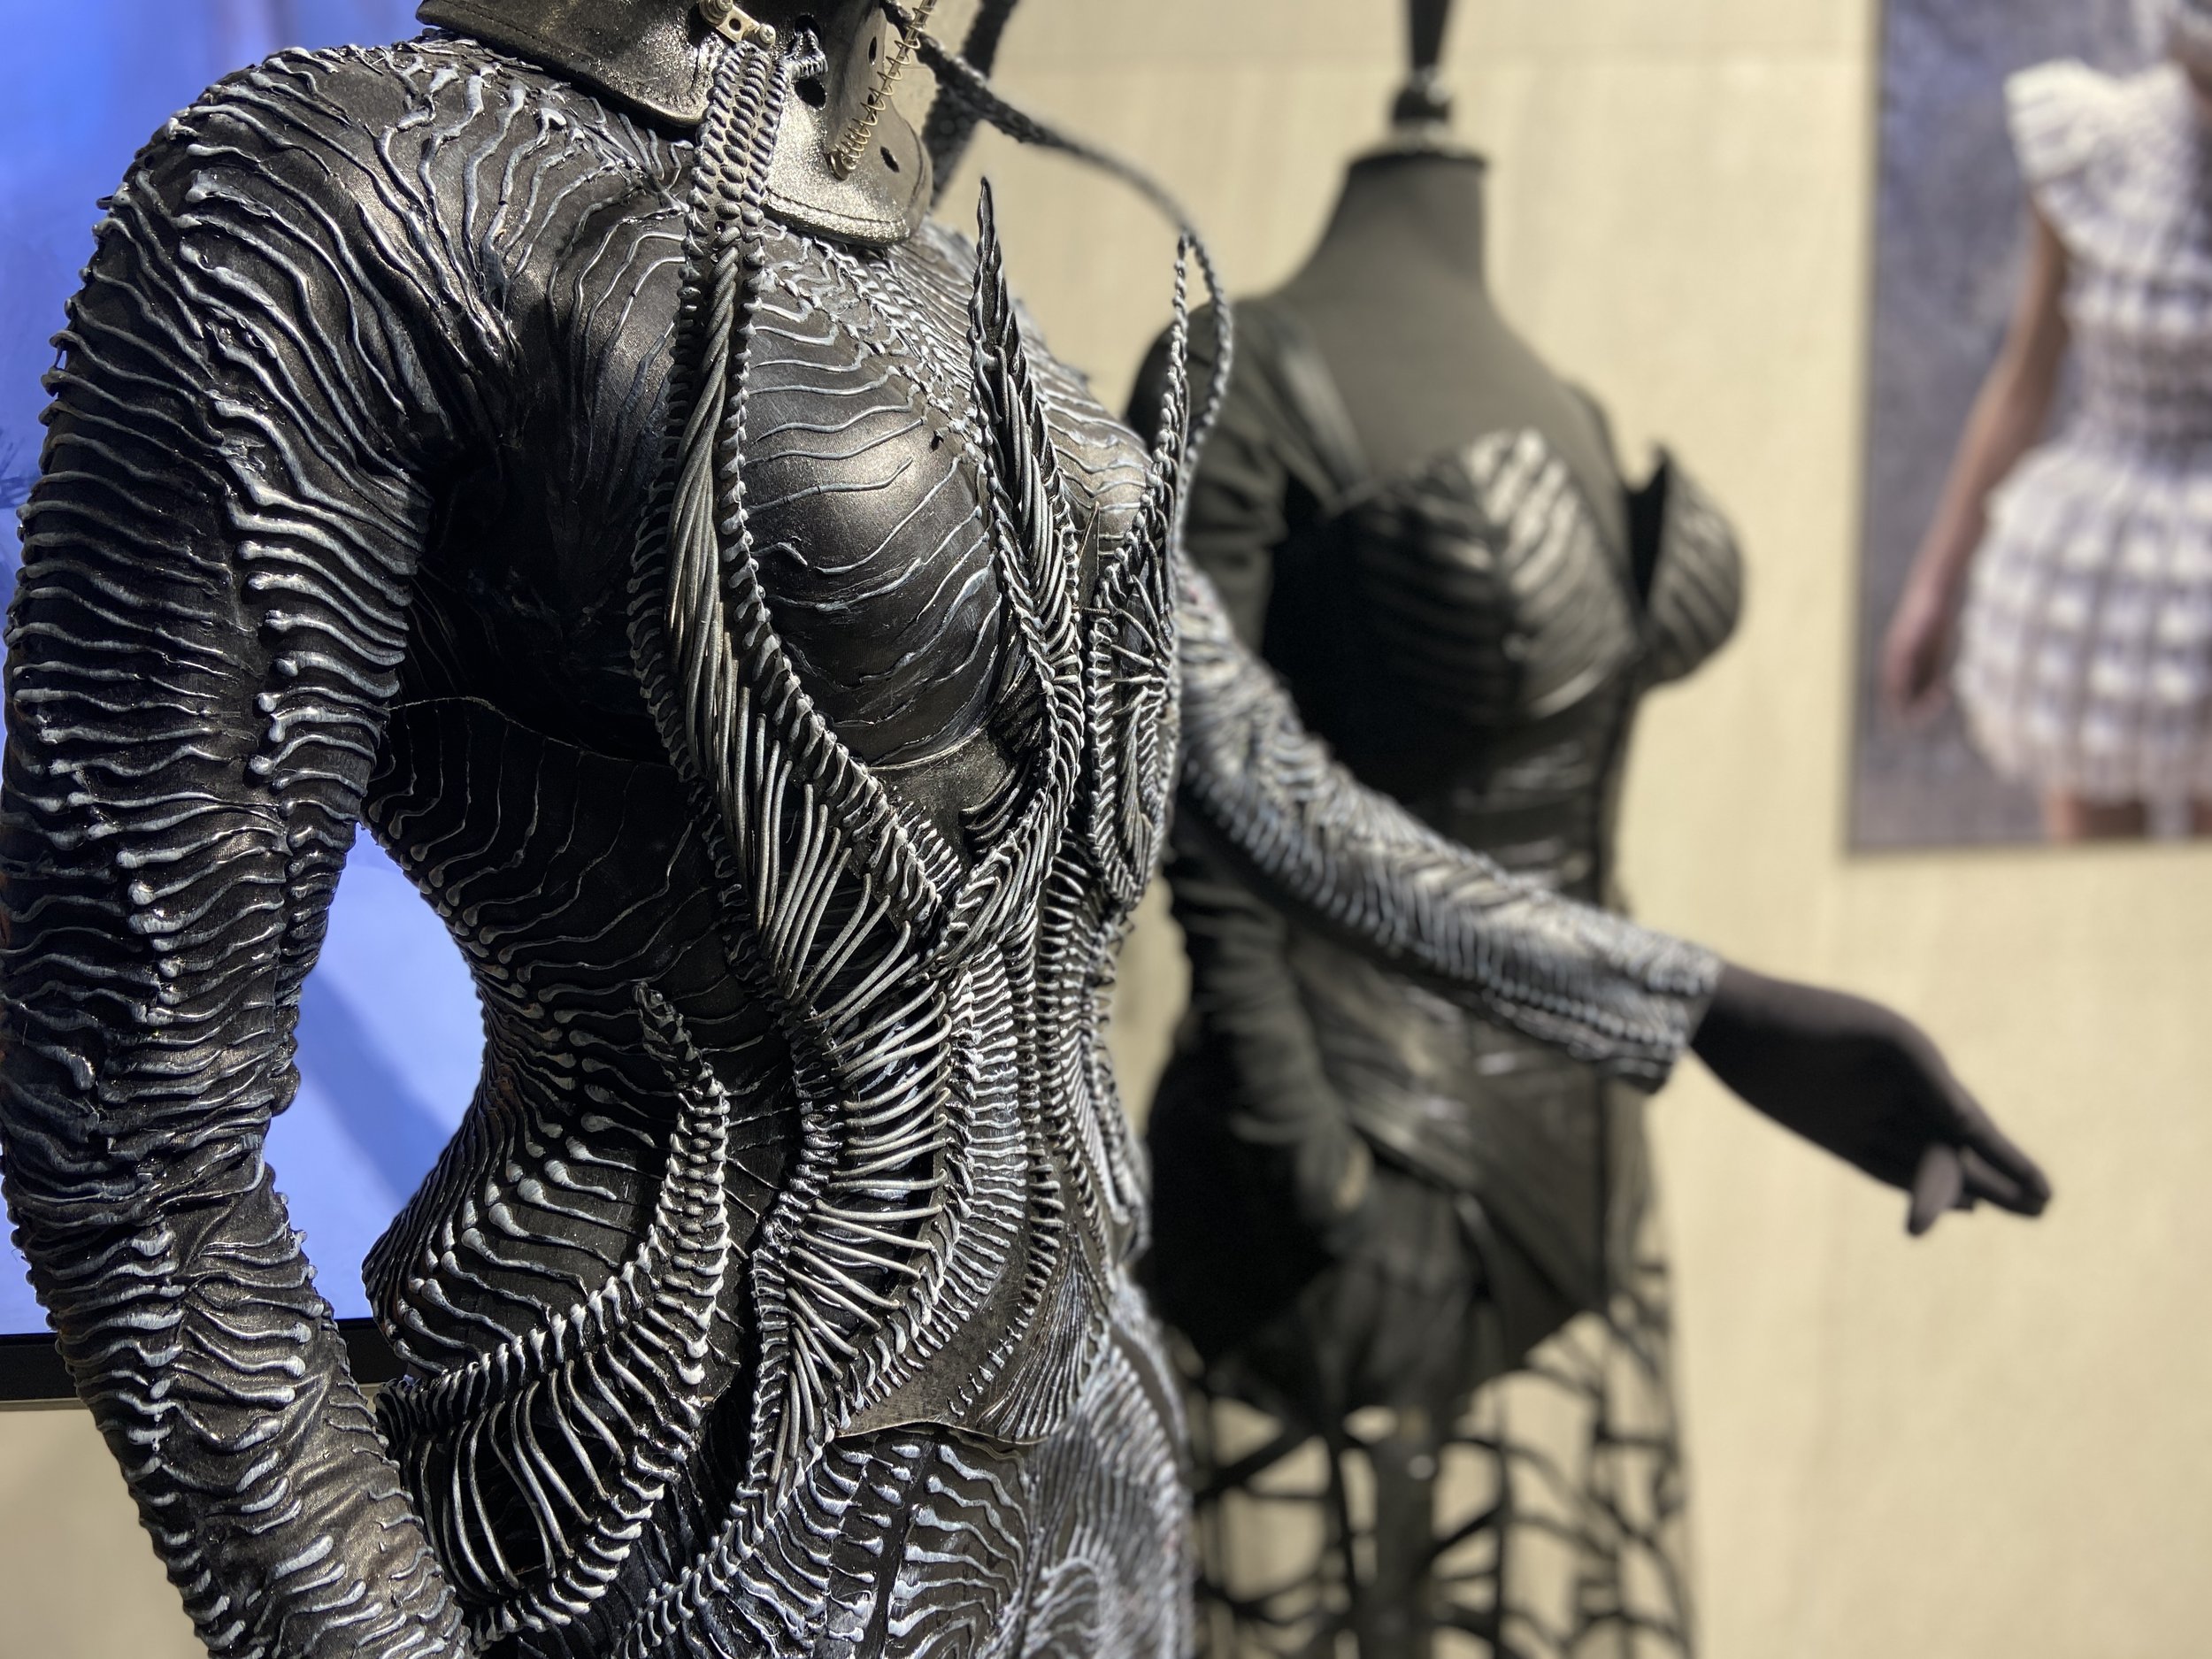 The Big Squeeze: The Corset as Art at 10 Times Square